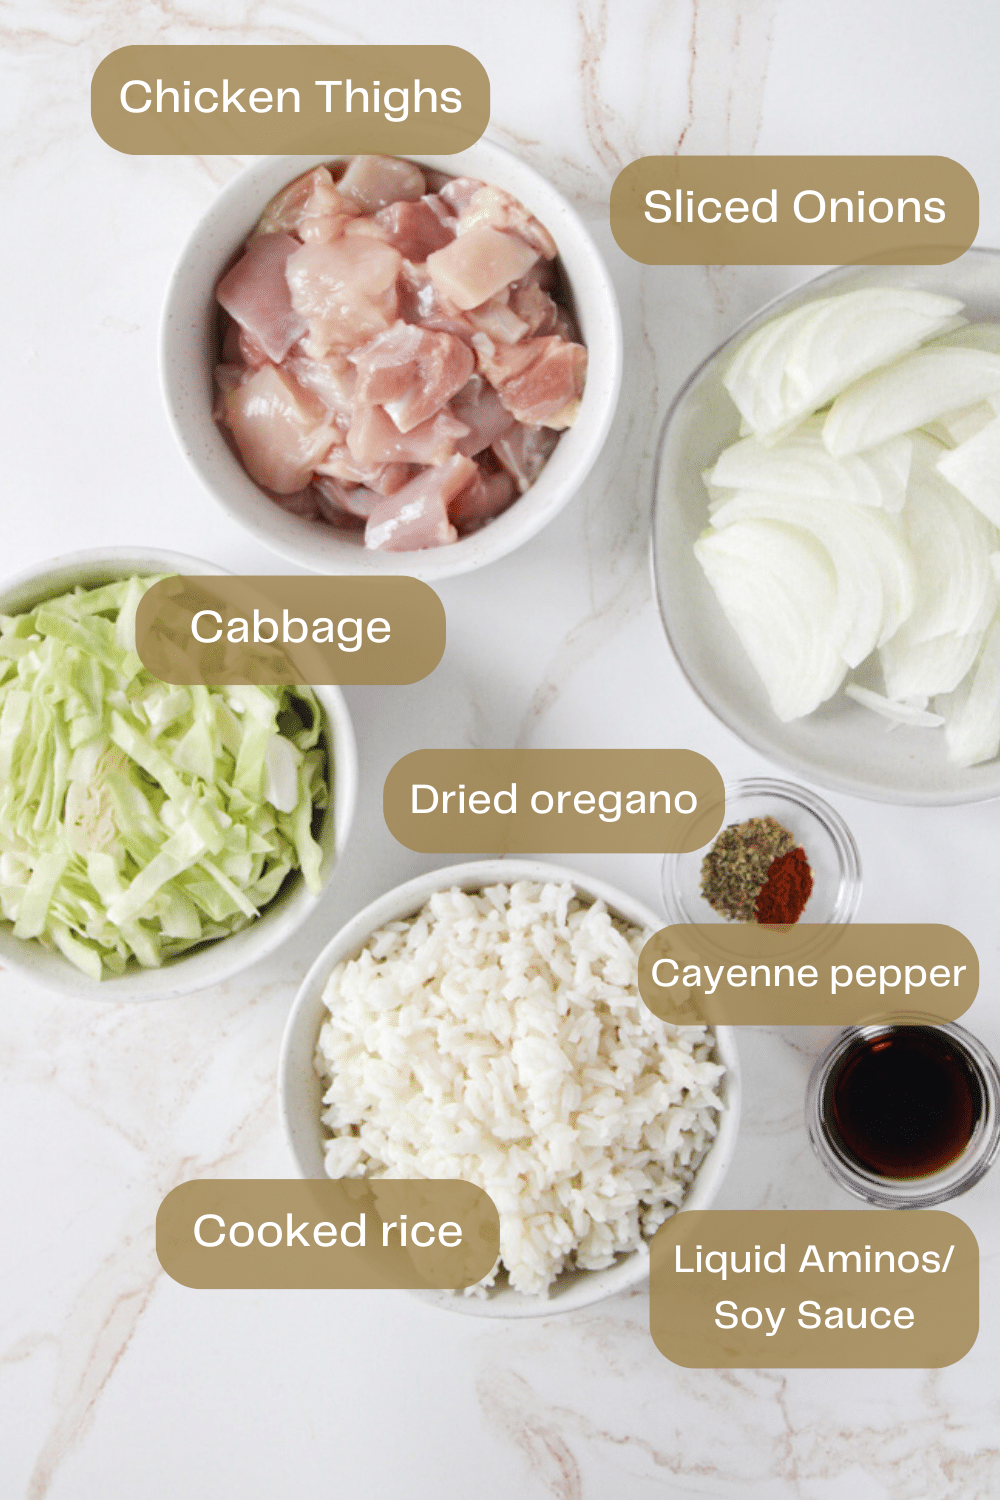 Chicken Fried Rice Ingredient Image infographic.